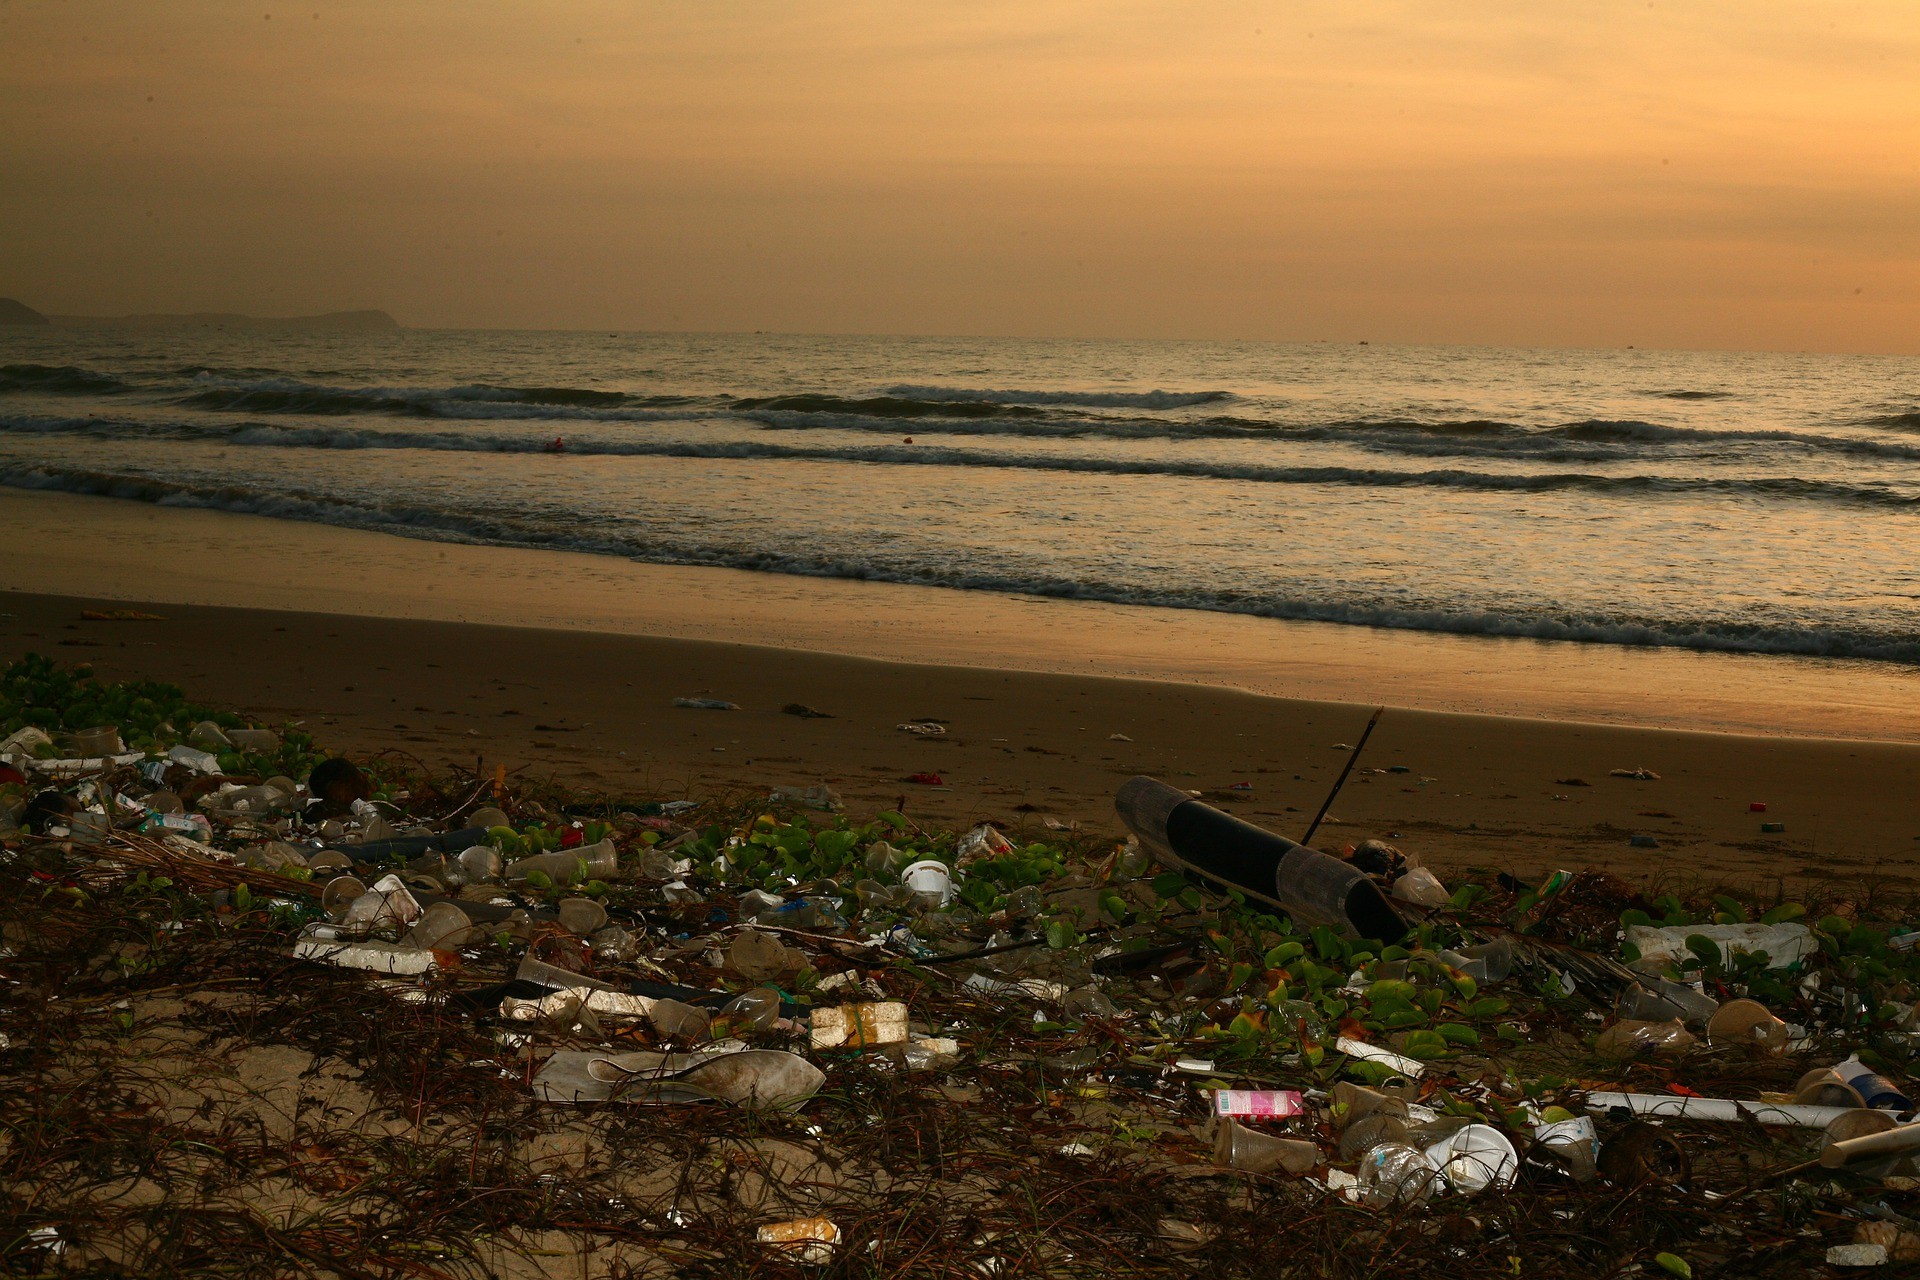 Trash on a beach at sunset with waves in the distance.